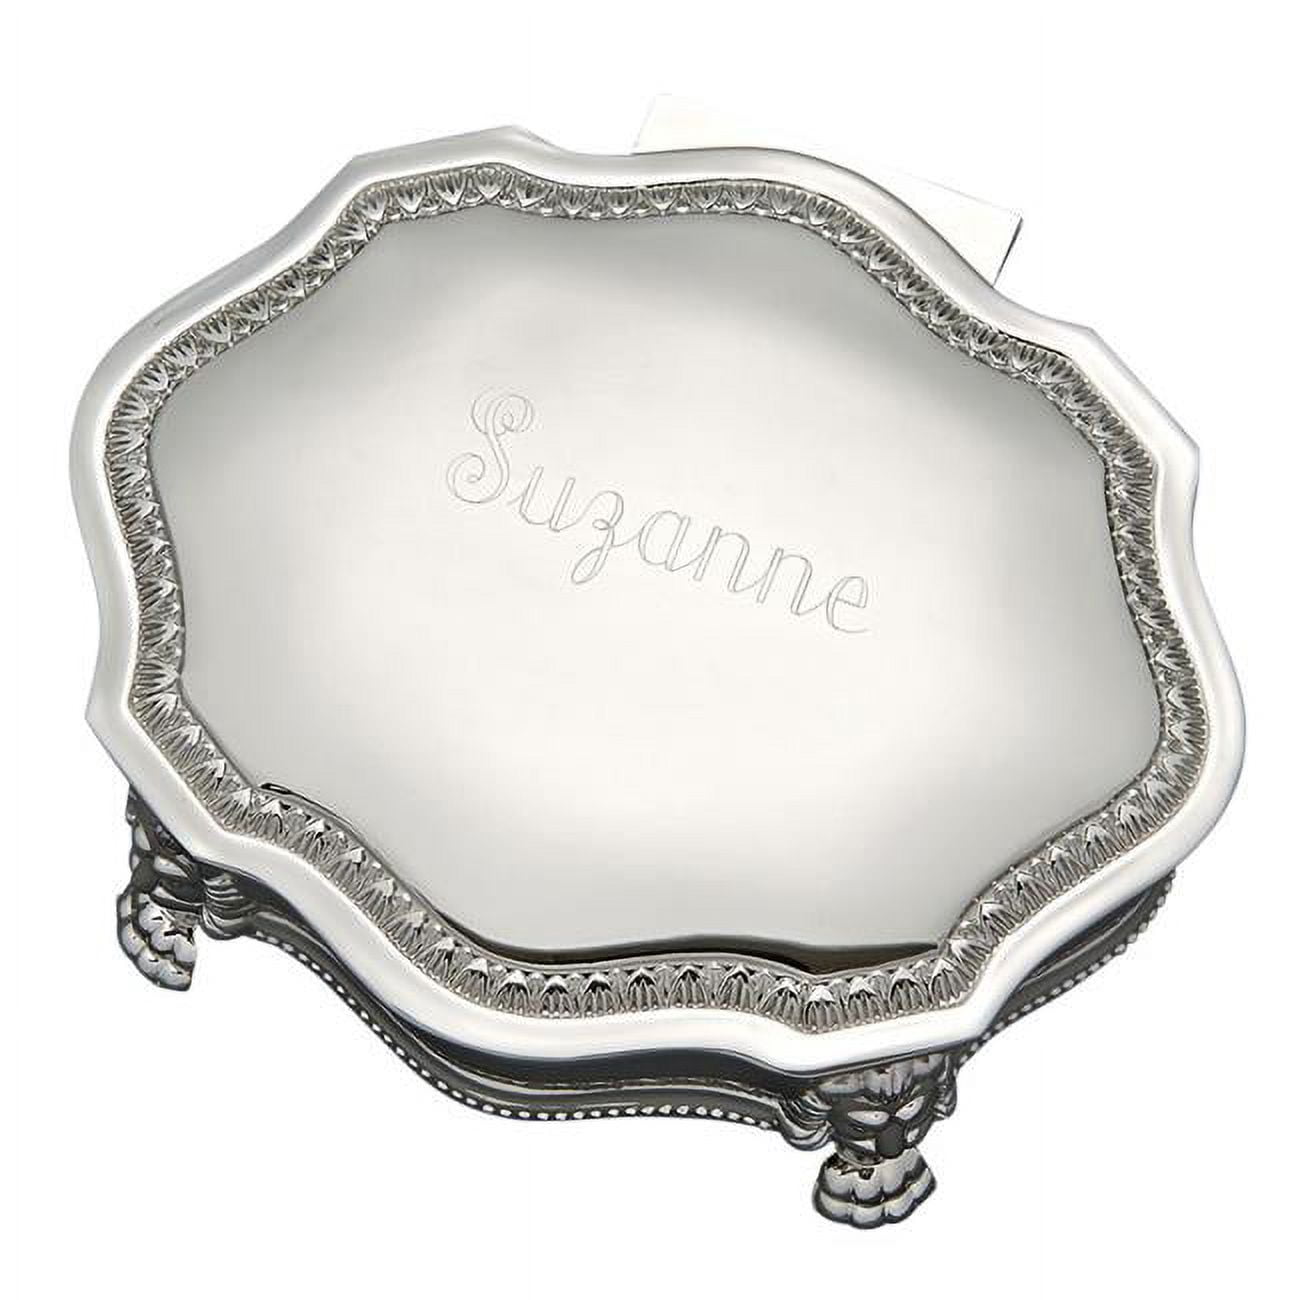 022020 6 X 5 In. Nickel Plated Victorian Jewelry Box - White